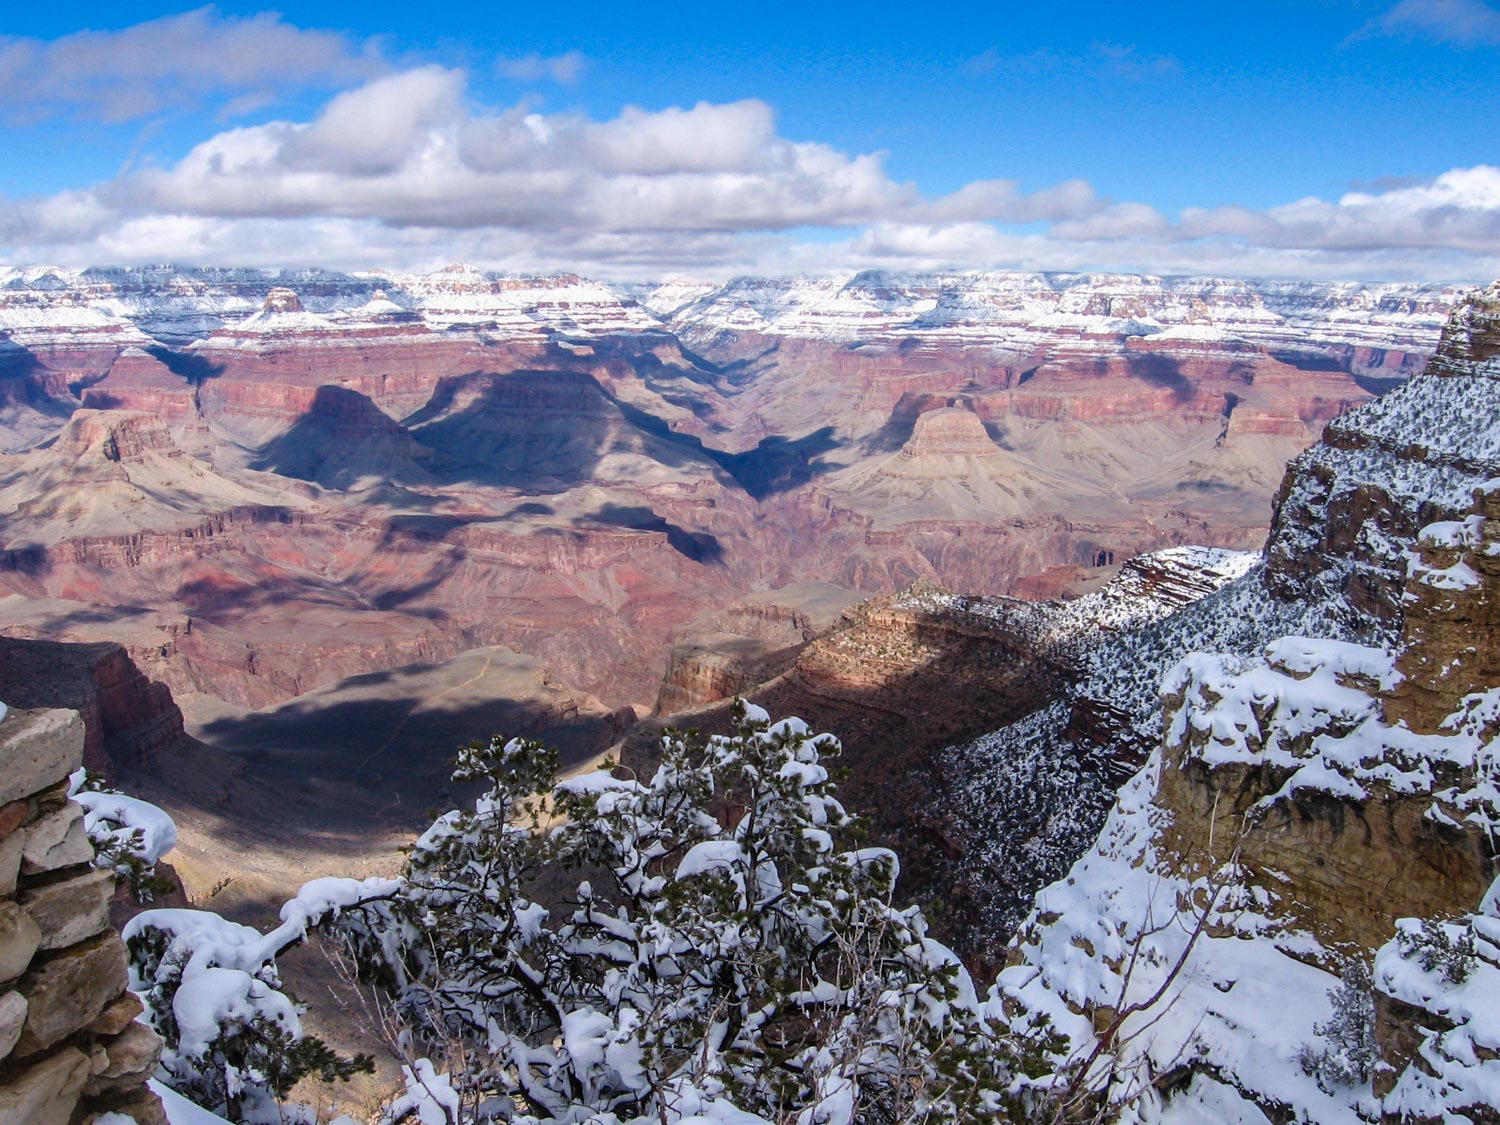 The view from the South Kaibab Trail © melpilgrim / Budget Travel 